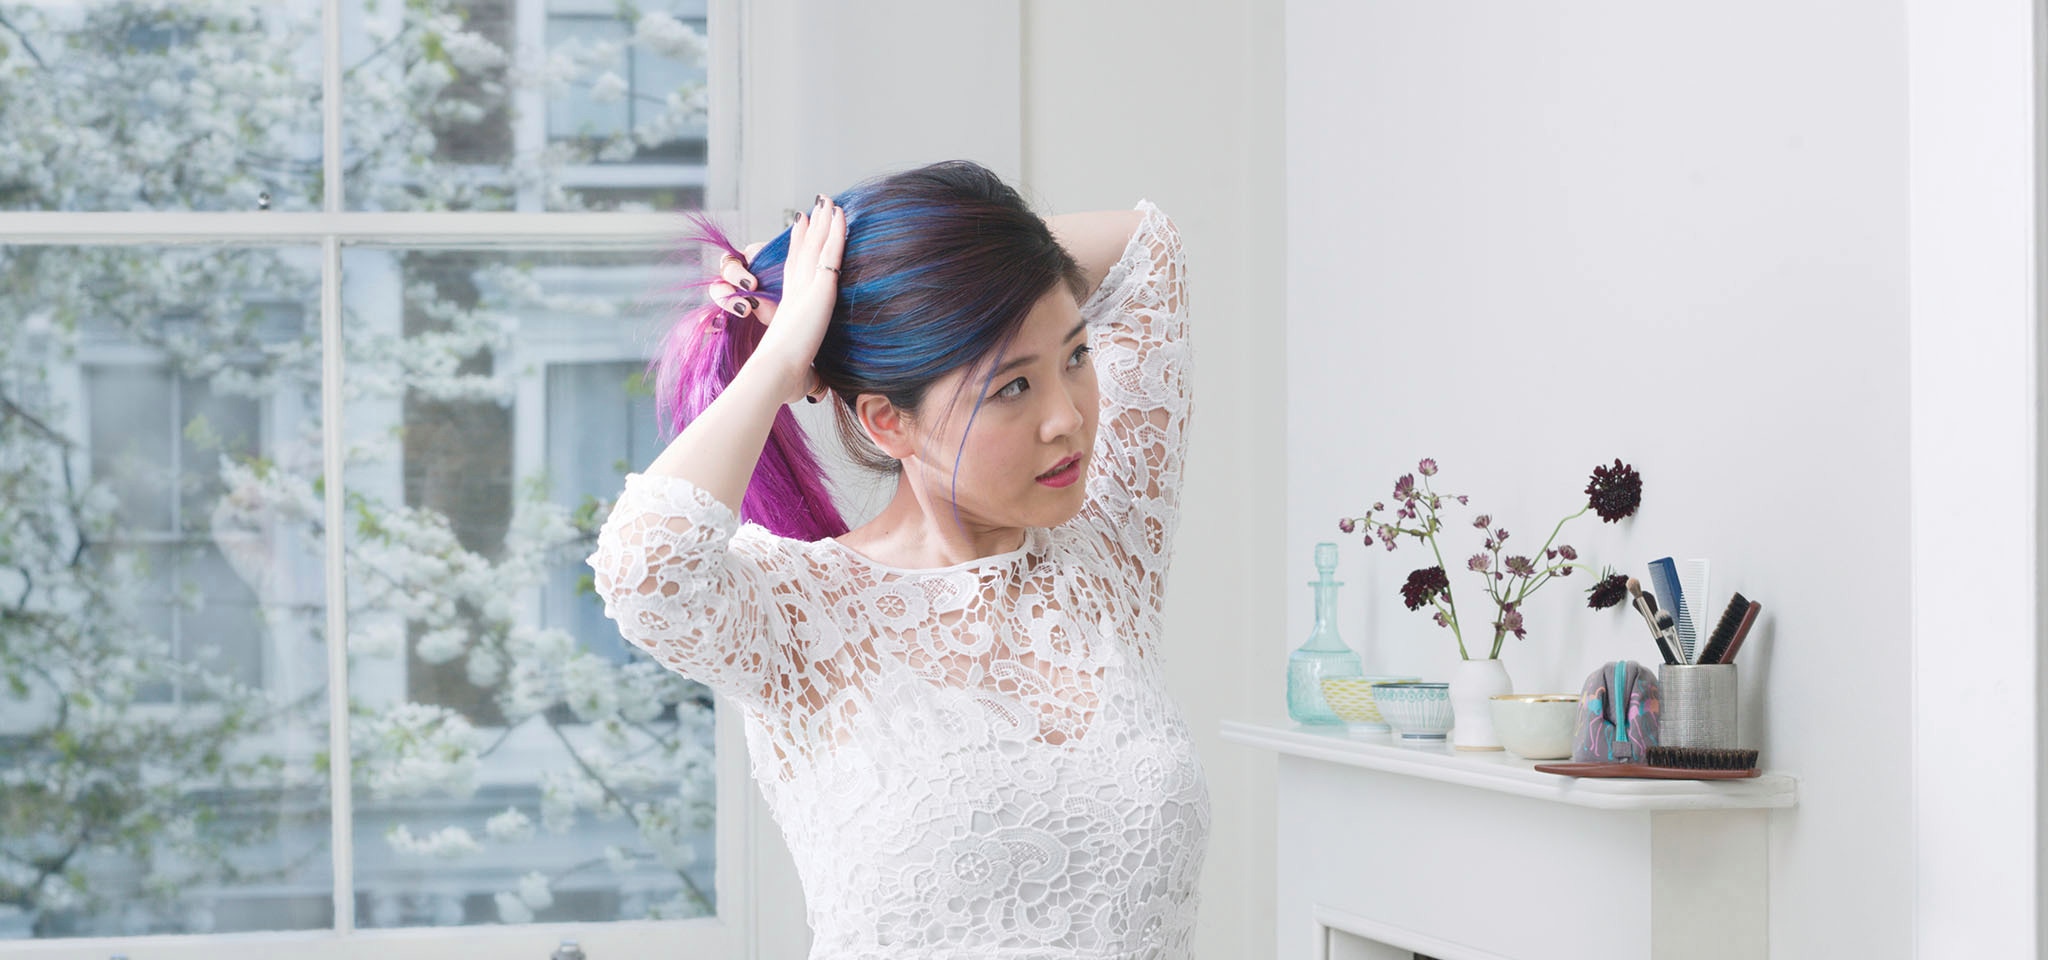 How to repair chemically damaged hair